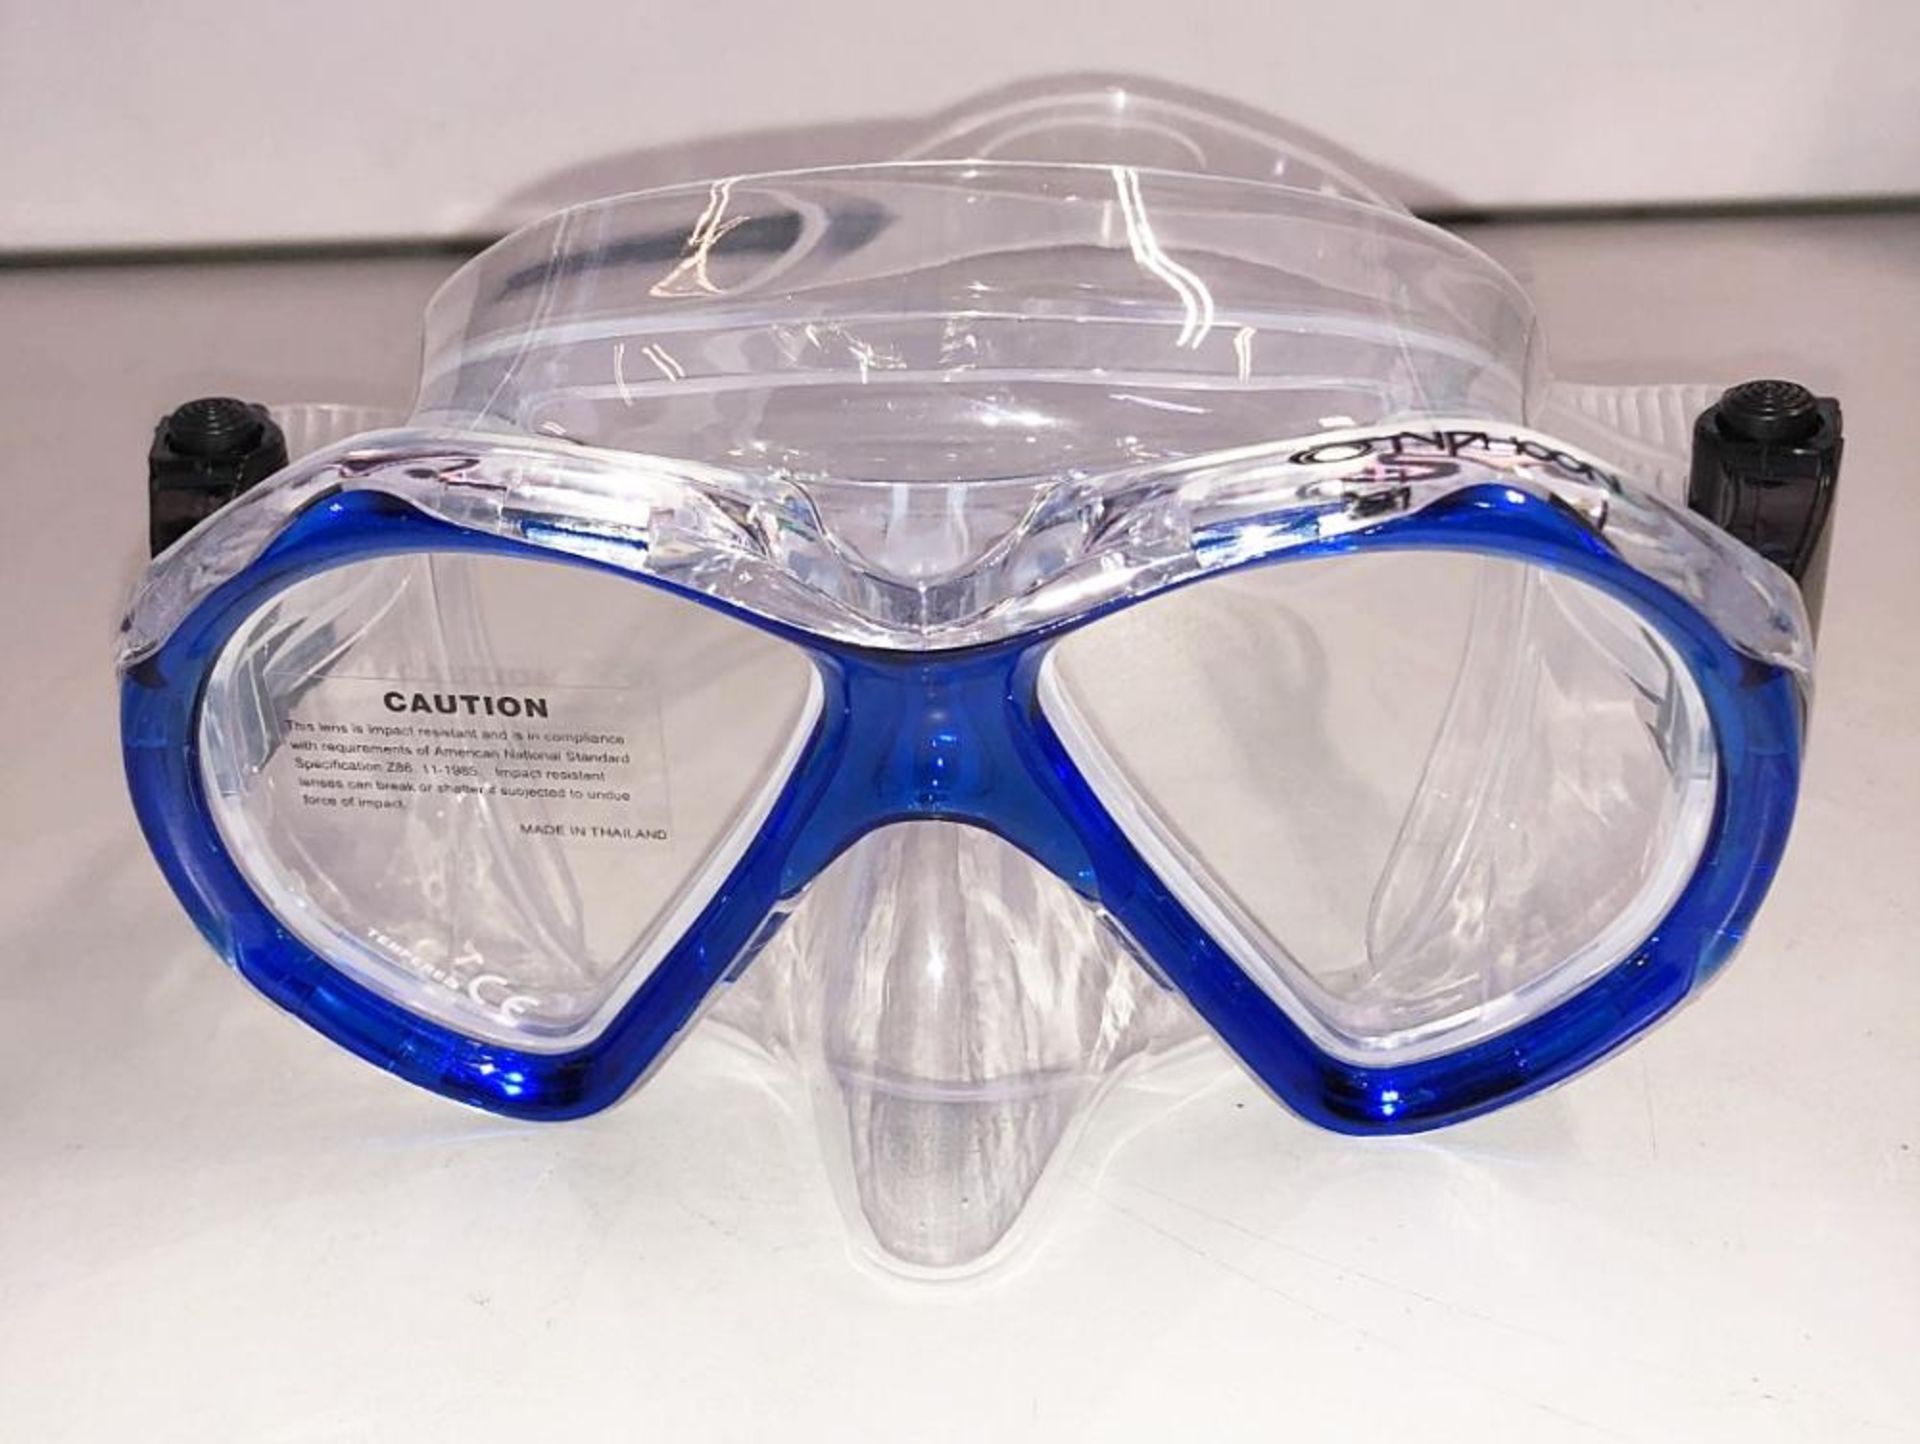 6 x New Branded Diving Masks - CL349 - Altrincham WA14 - Total RRP £187.44 - Image 13 of 20